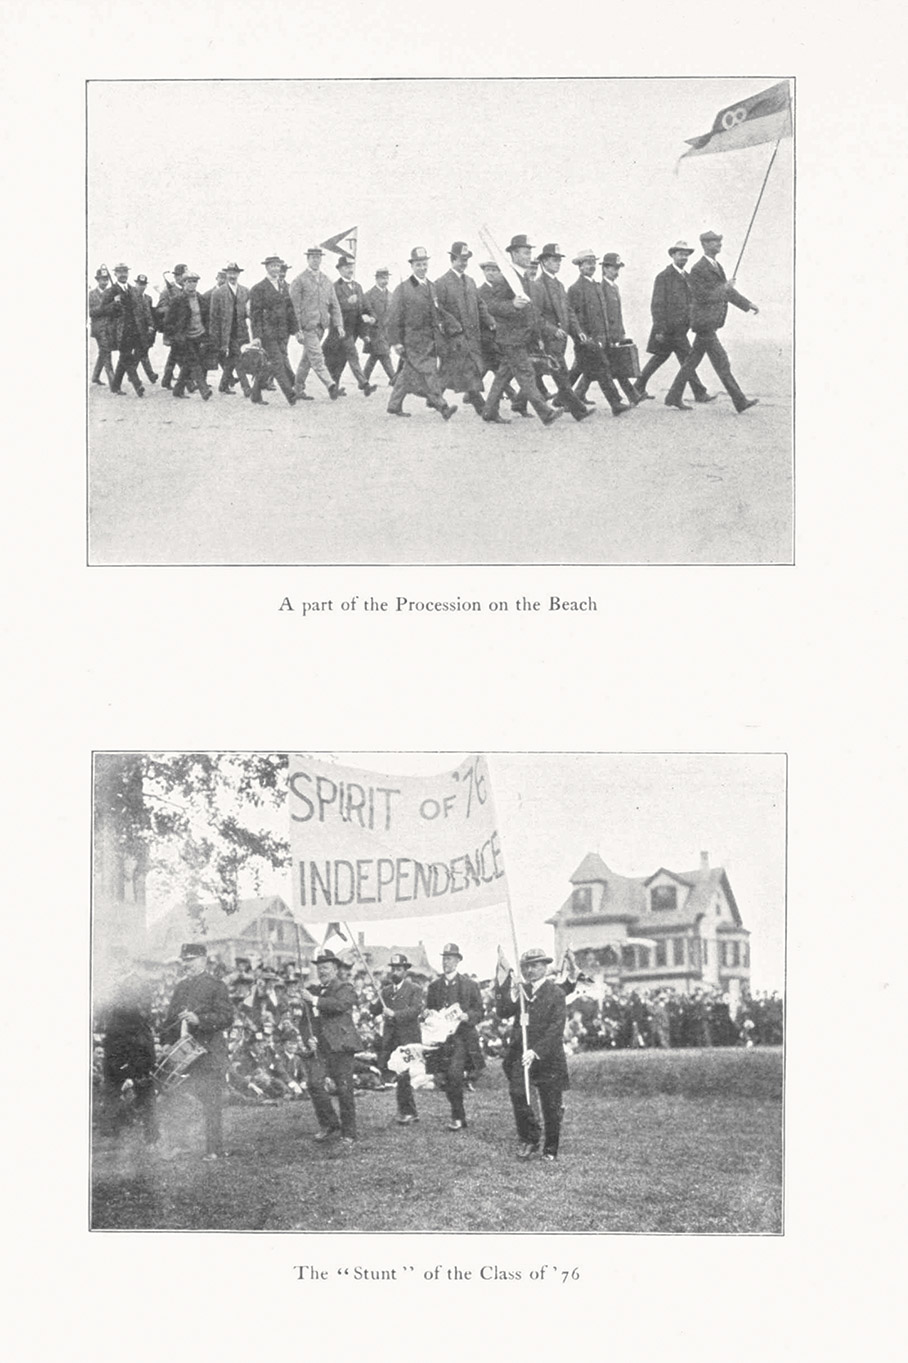 two photos: the top show people walking and is captioned "A part of the Procession on the Beach." The bottom image shows a group walking with a sign that reads " Spirit of '76 Independence" and is captioned "The 'Stunt' of the Class of '76"